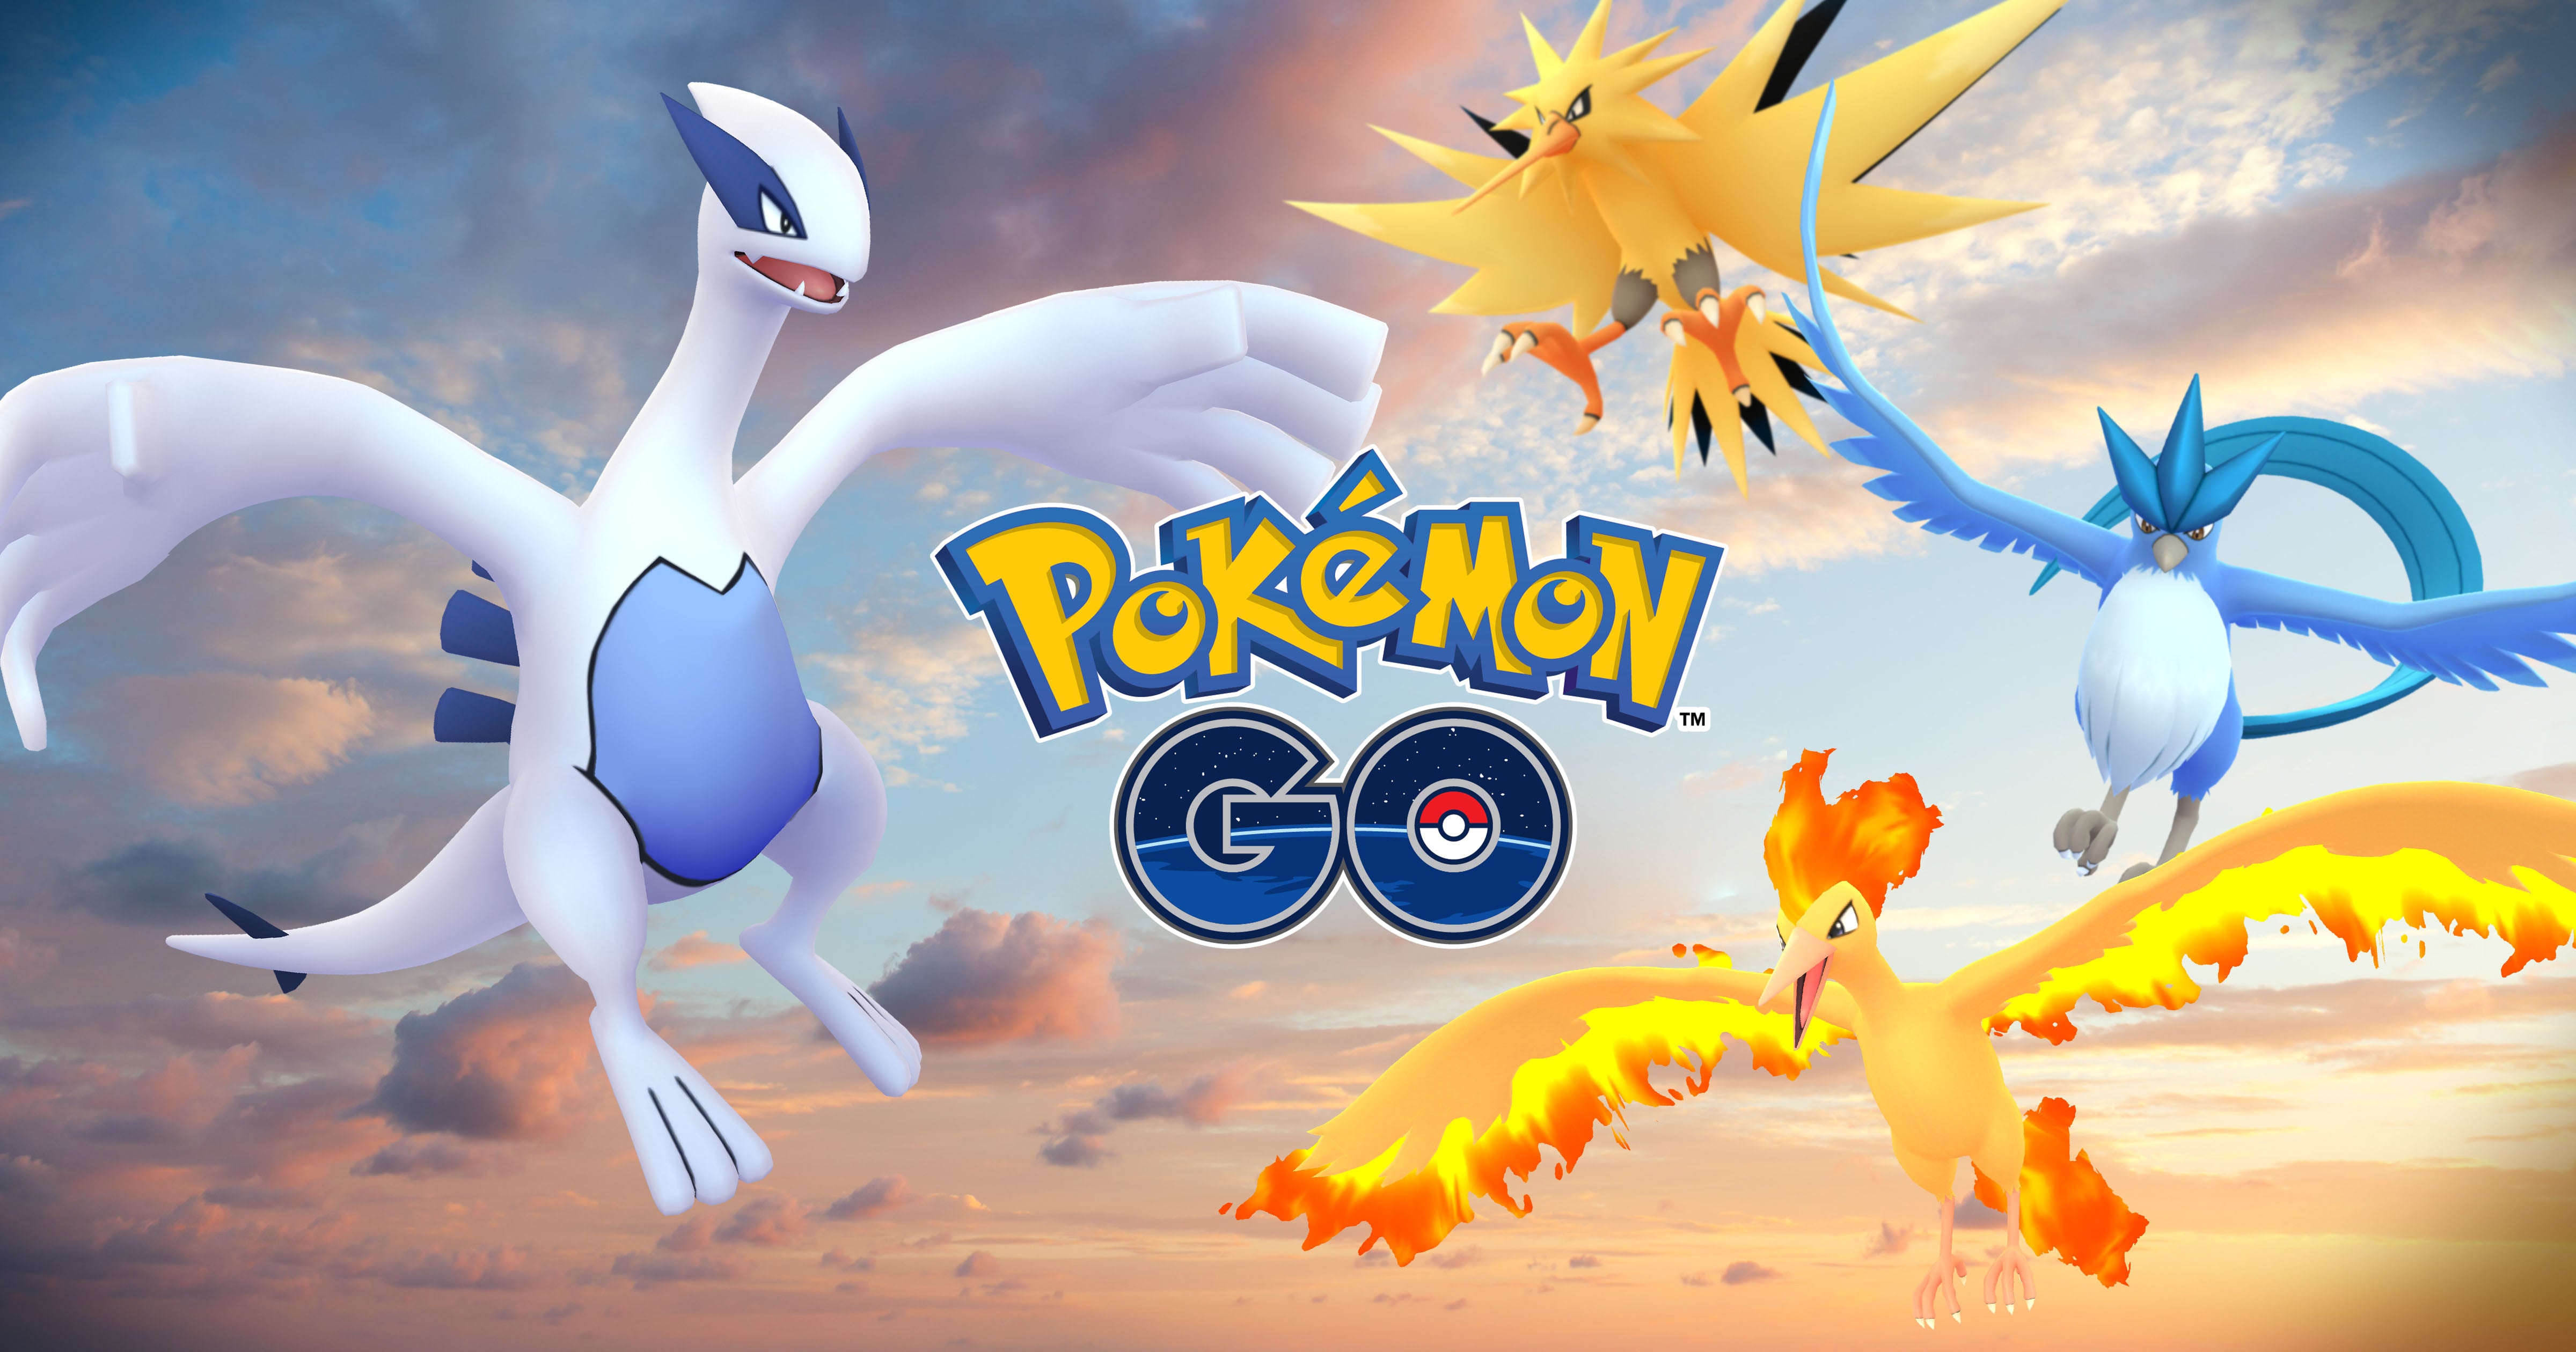 Two legendary Pokemon now available for GO trainers, two more coming soon